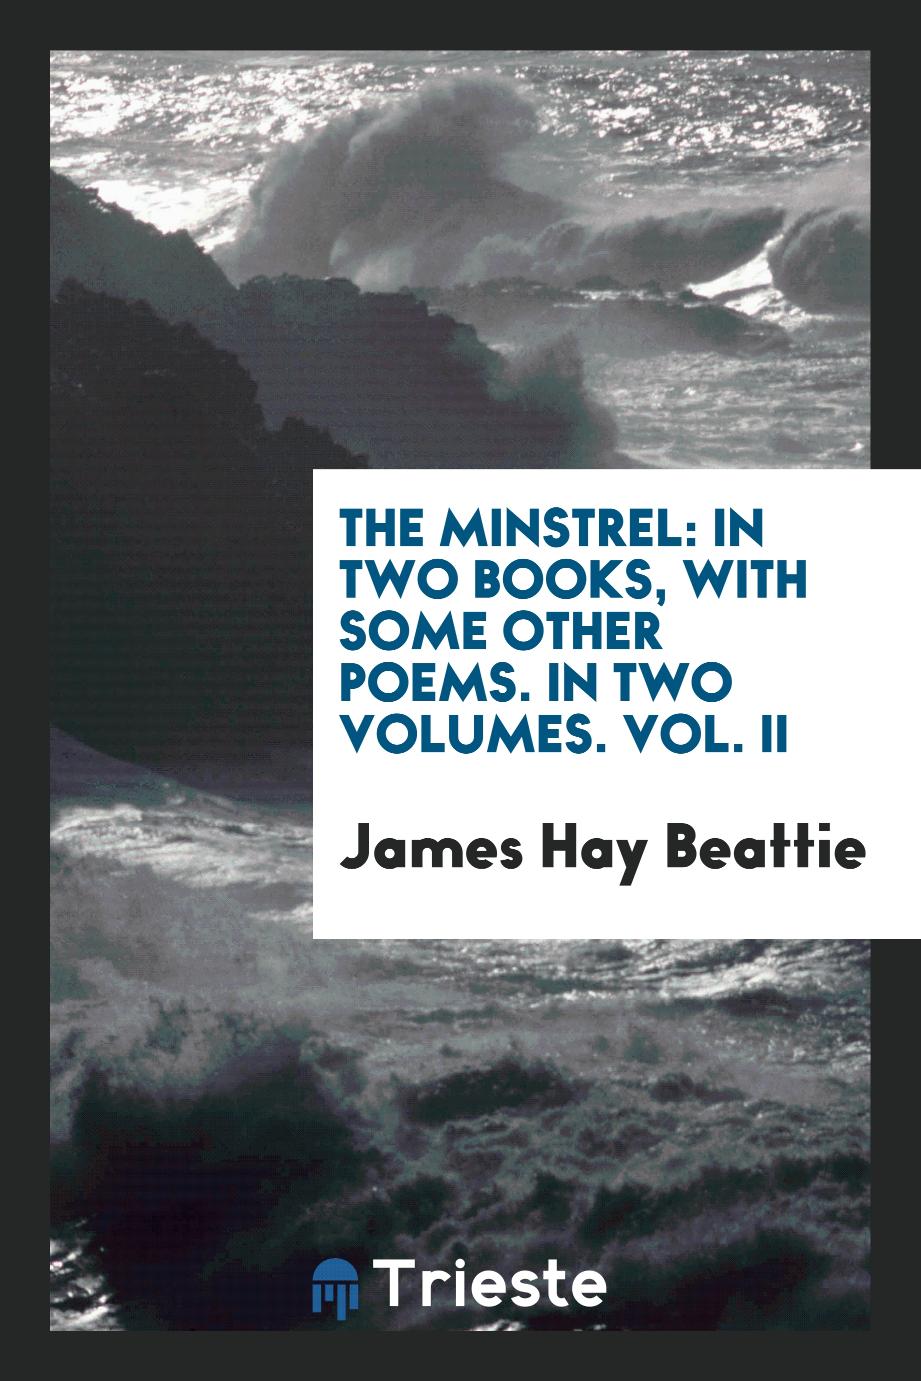 The Minstrel: In Two Books, with Some Other Poems. In Two Volumes. Vol. II